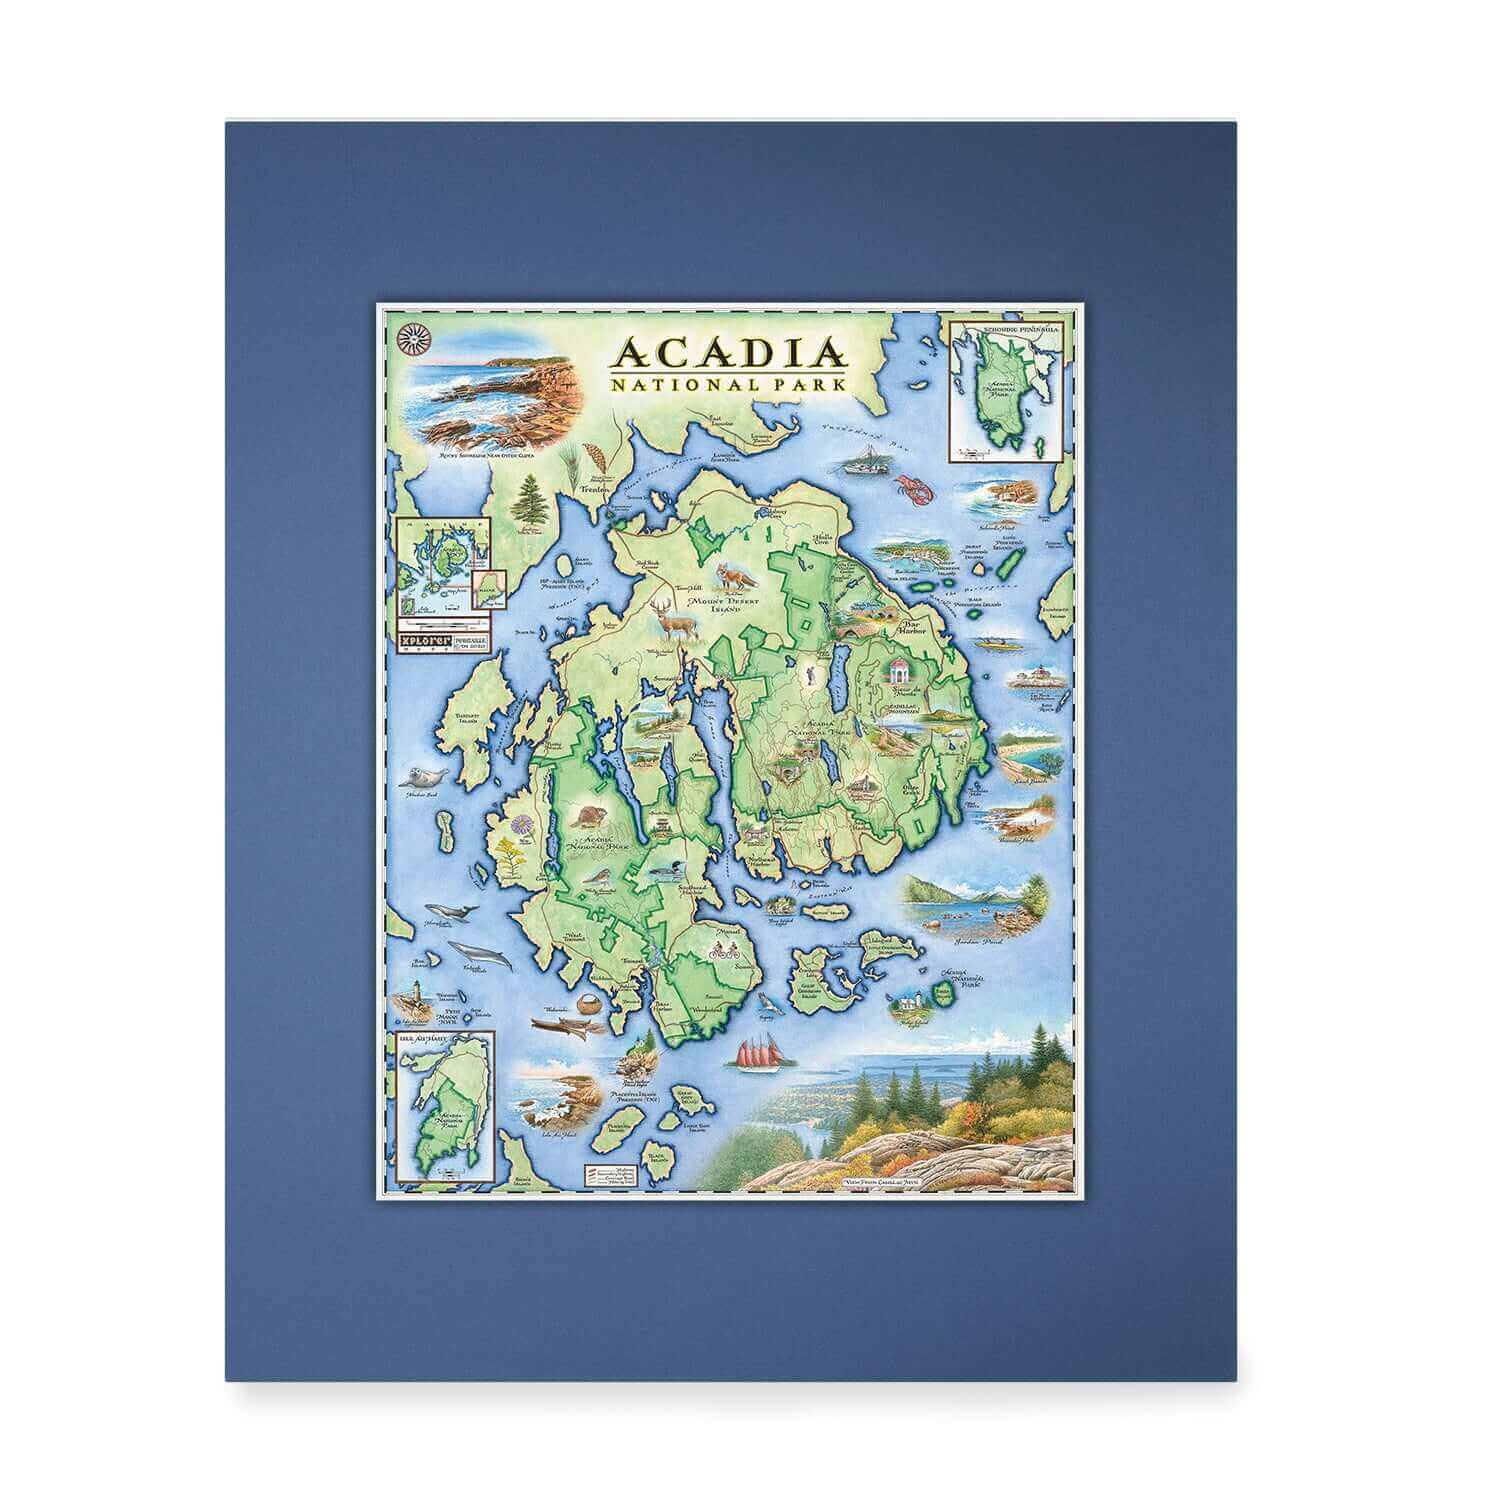 Acadia Mini-Map with a custom blue matte. Map features areas such as Bar Harbor, Waterfall Bridge, and Sieur de Monts Spring. Flora and fauna such as fox, lobster, and beaver.